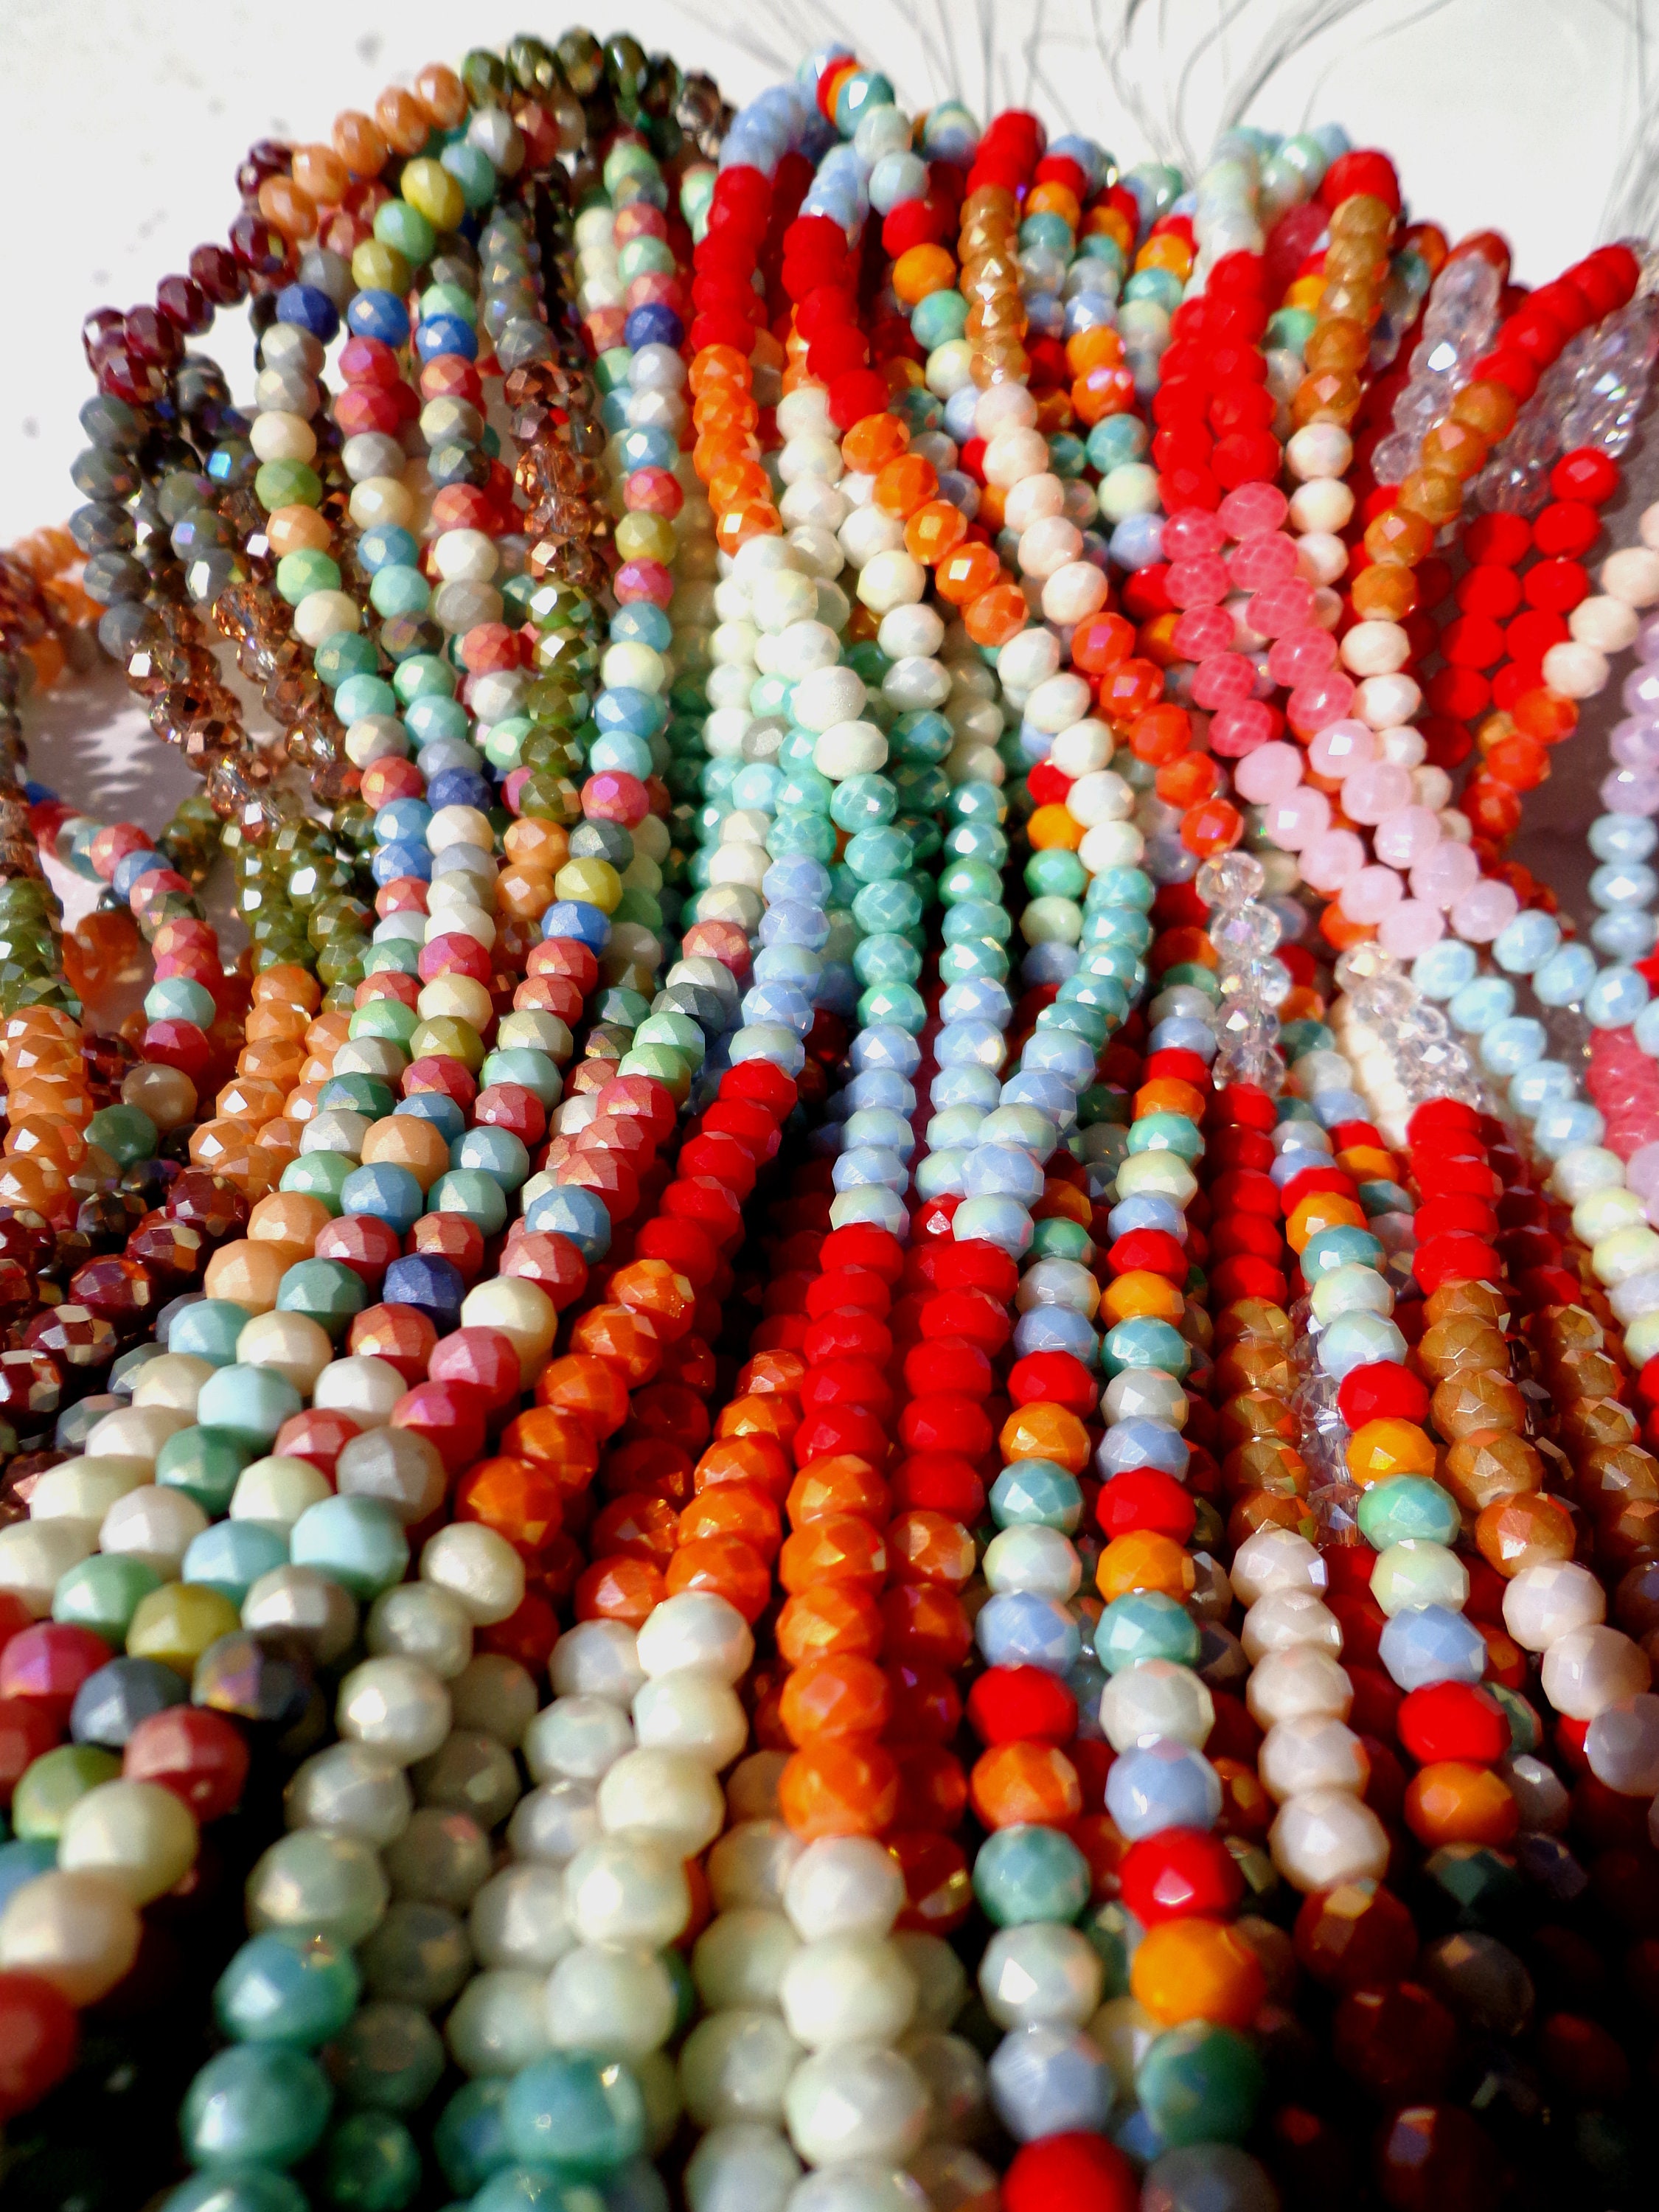 200Pcs 4mm Glass Beads Round Crystal Beads Colorful Spacer Bead For  Bracelet Jewelry Making DIY